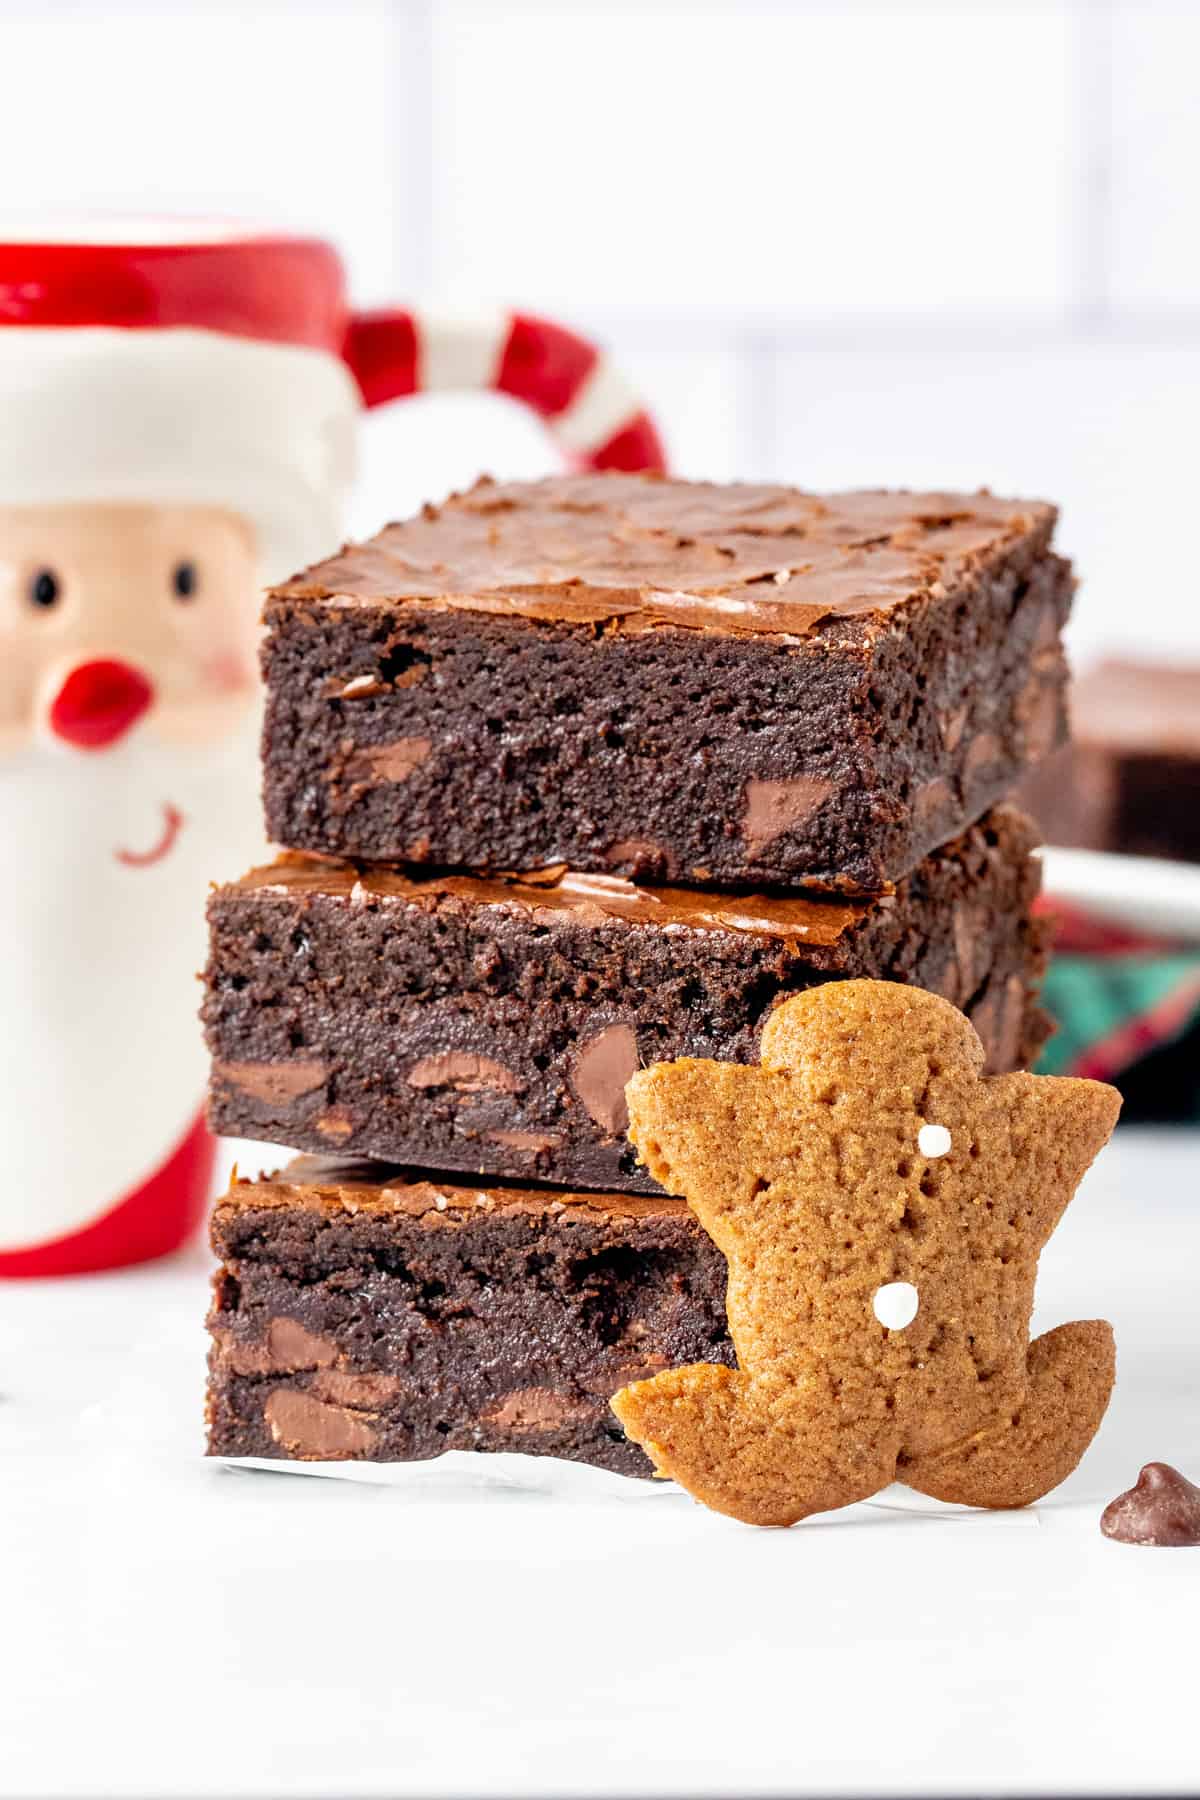 Three gingerbread brownies, one on top of each other